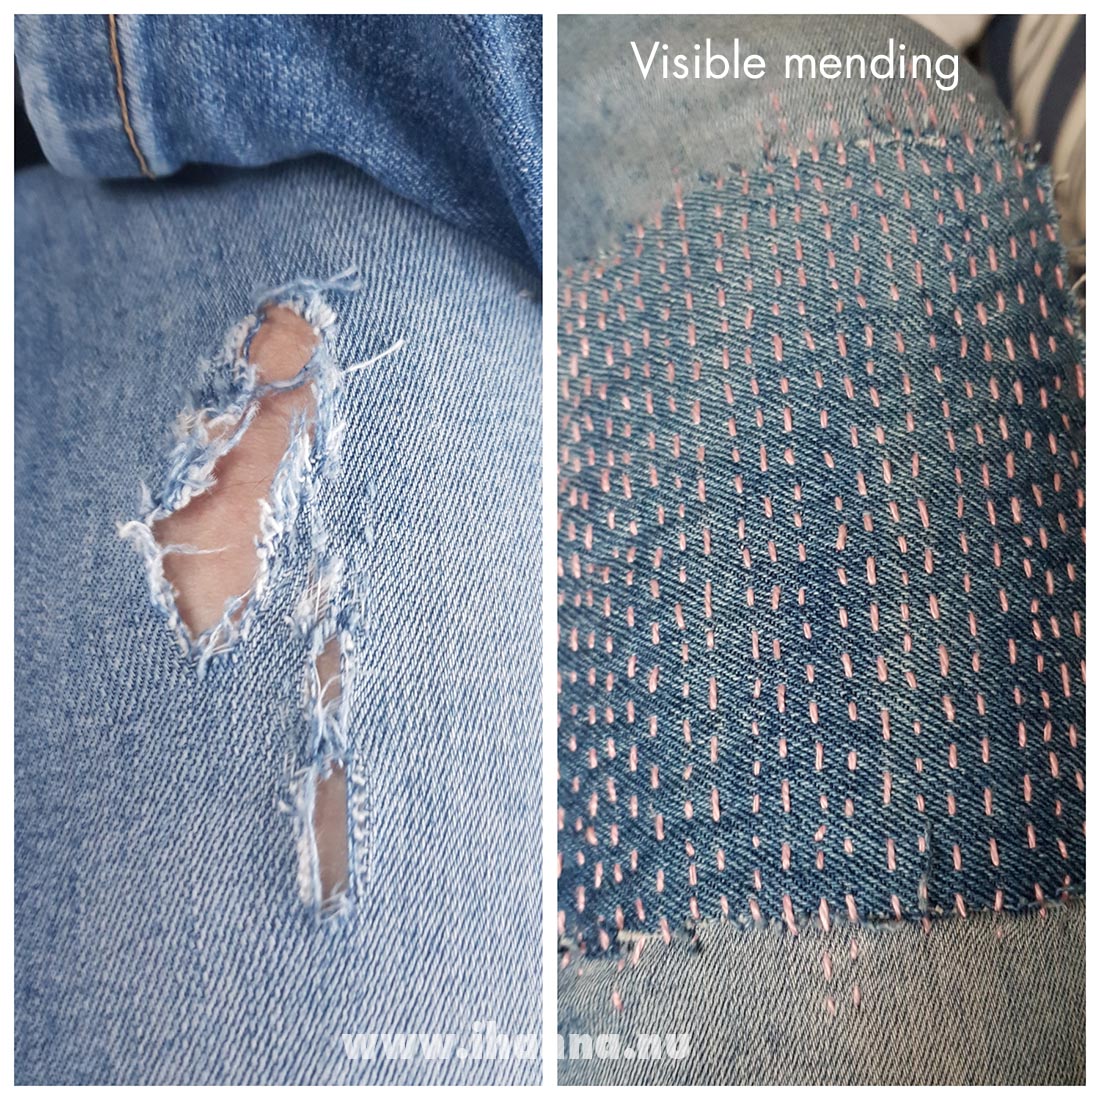 Mending jeans with patches and visible stitching is SO fun. Photo copyright Hanna Andersson